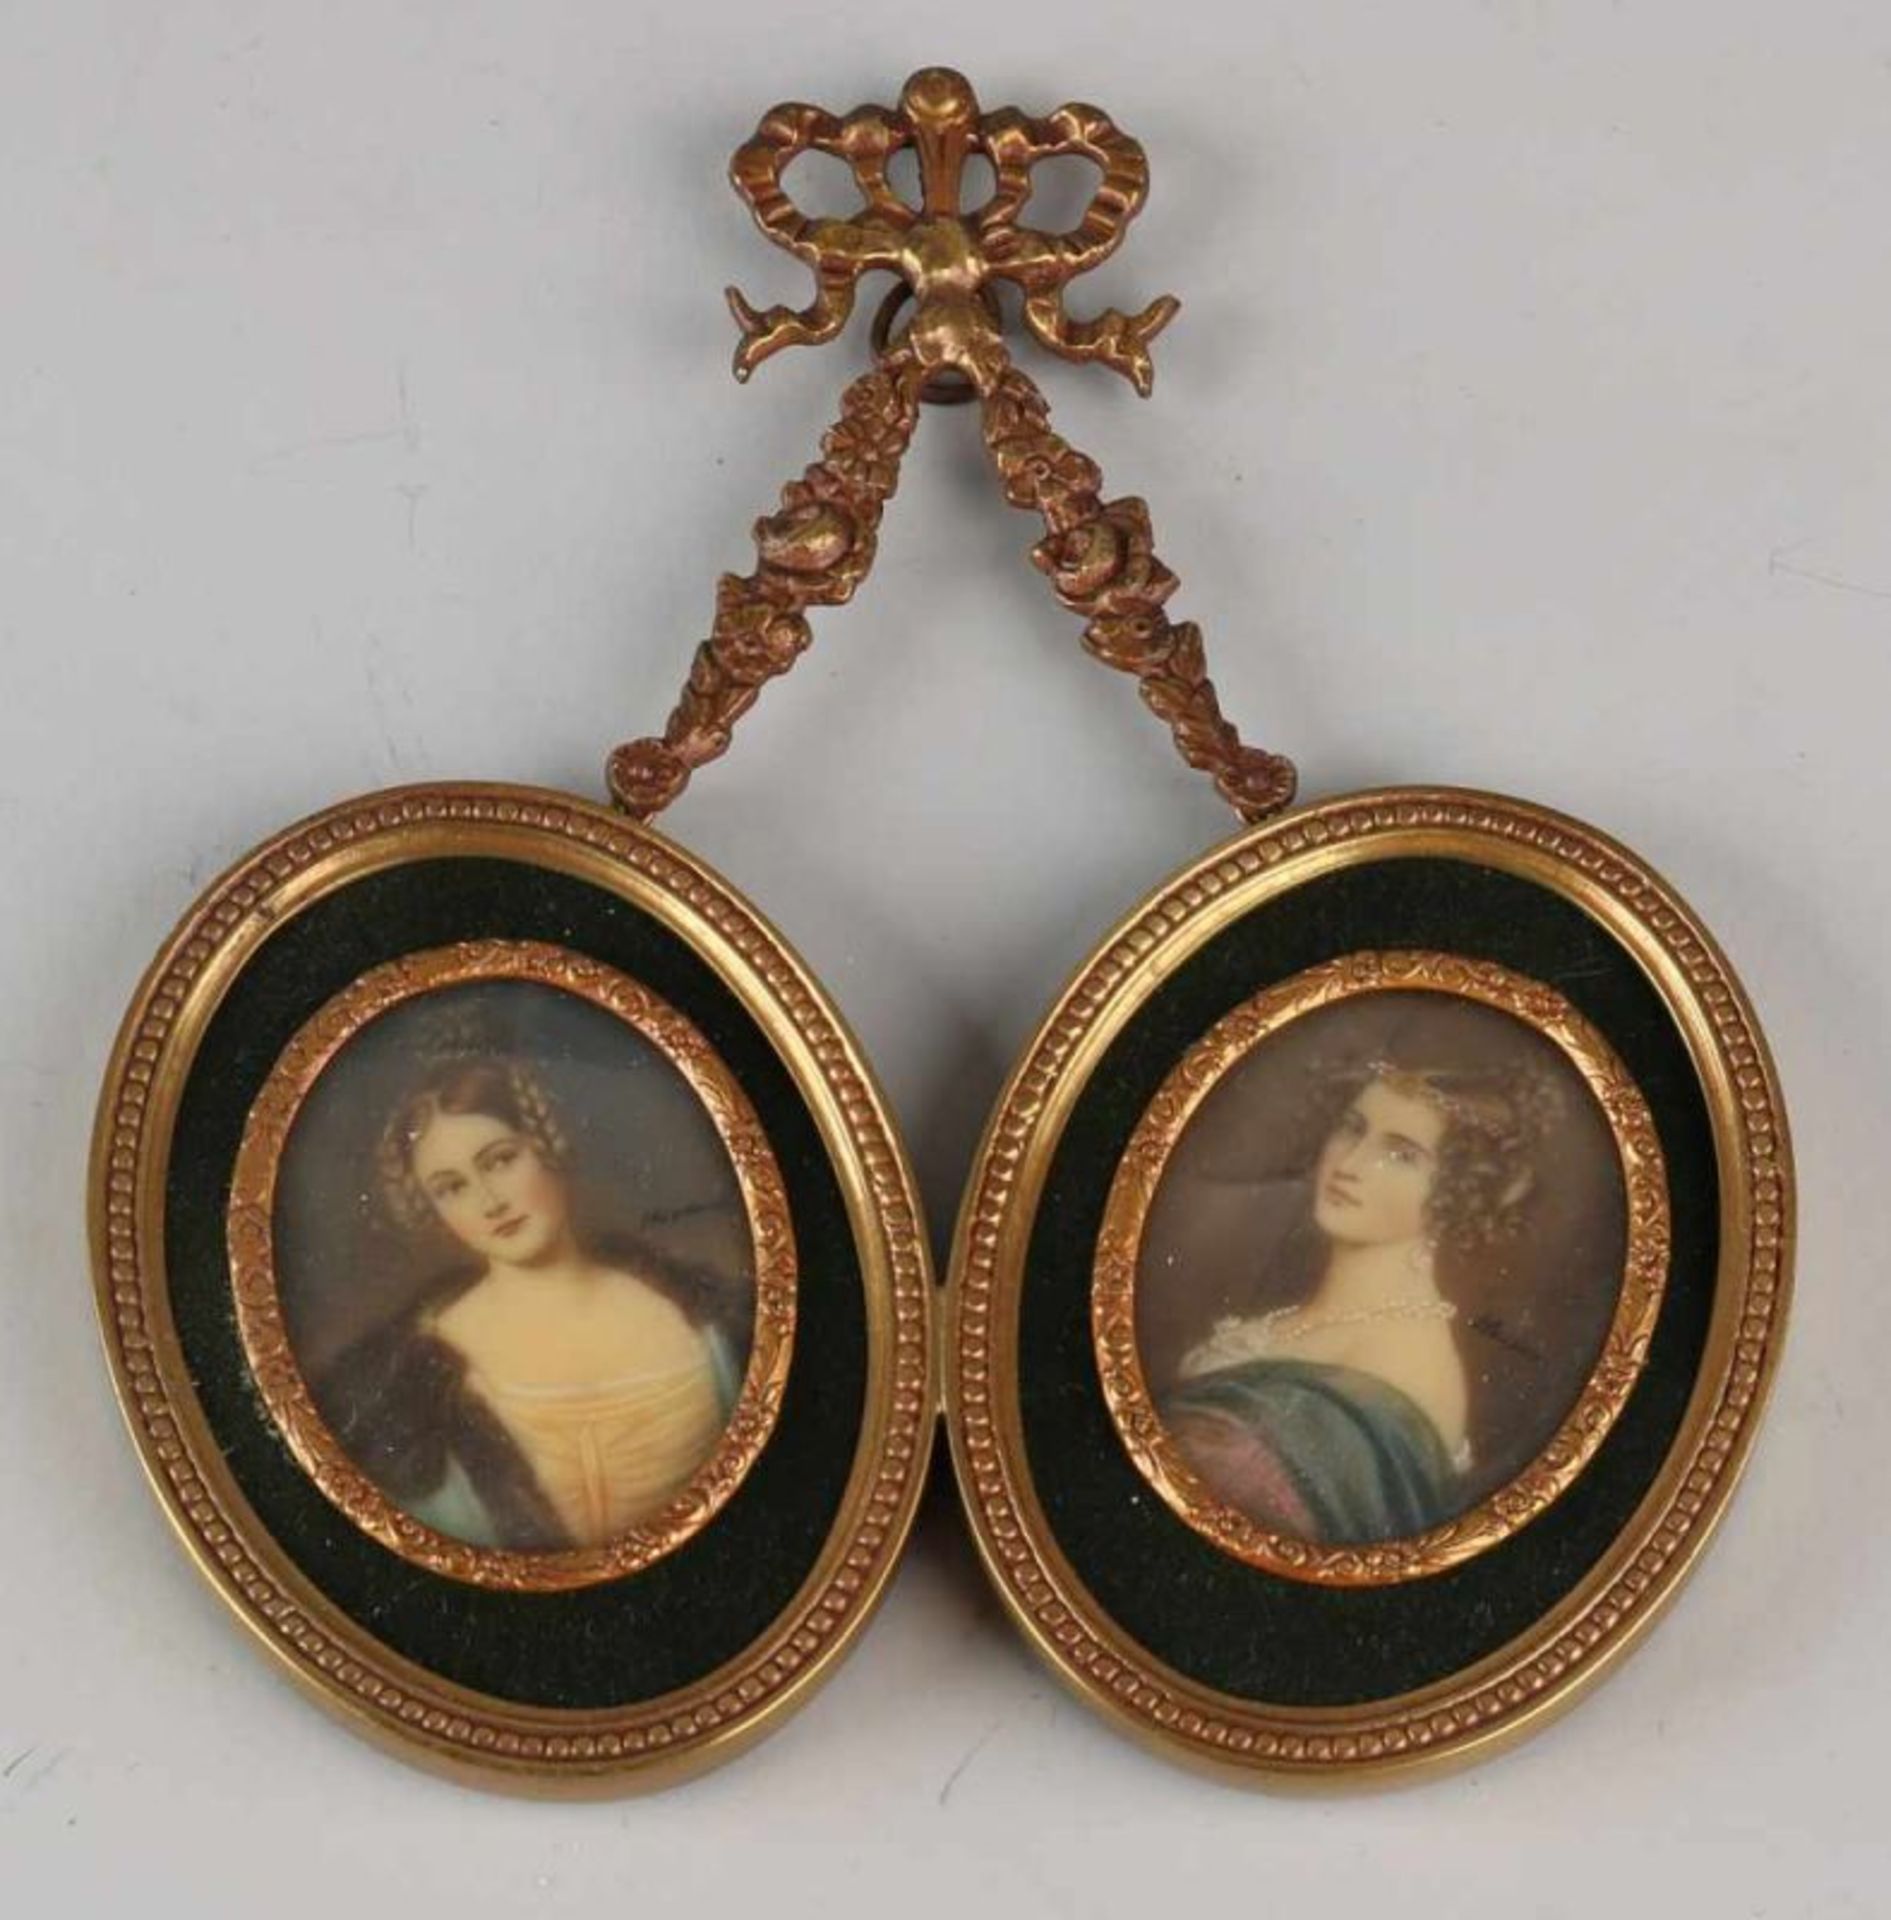 Two miniatures in brass frame. Louis Seize style. Women's portraits. Signed. Dimensions: 15.5 x 13 x